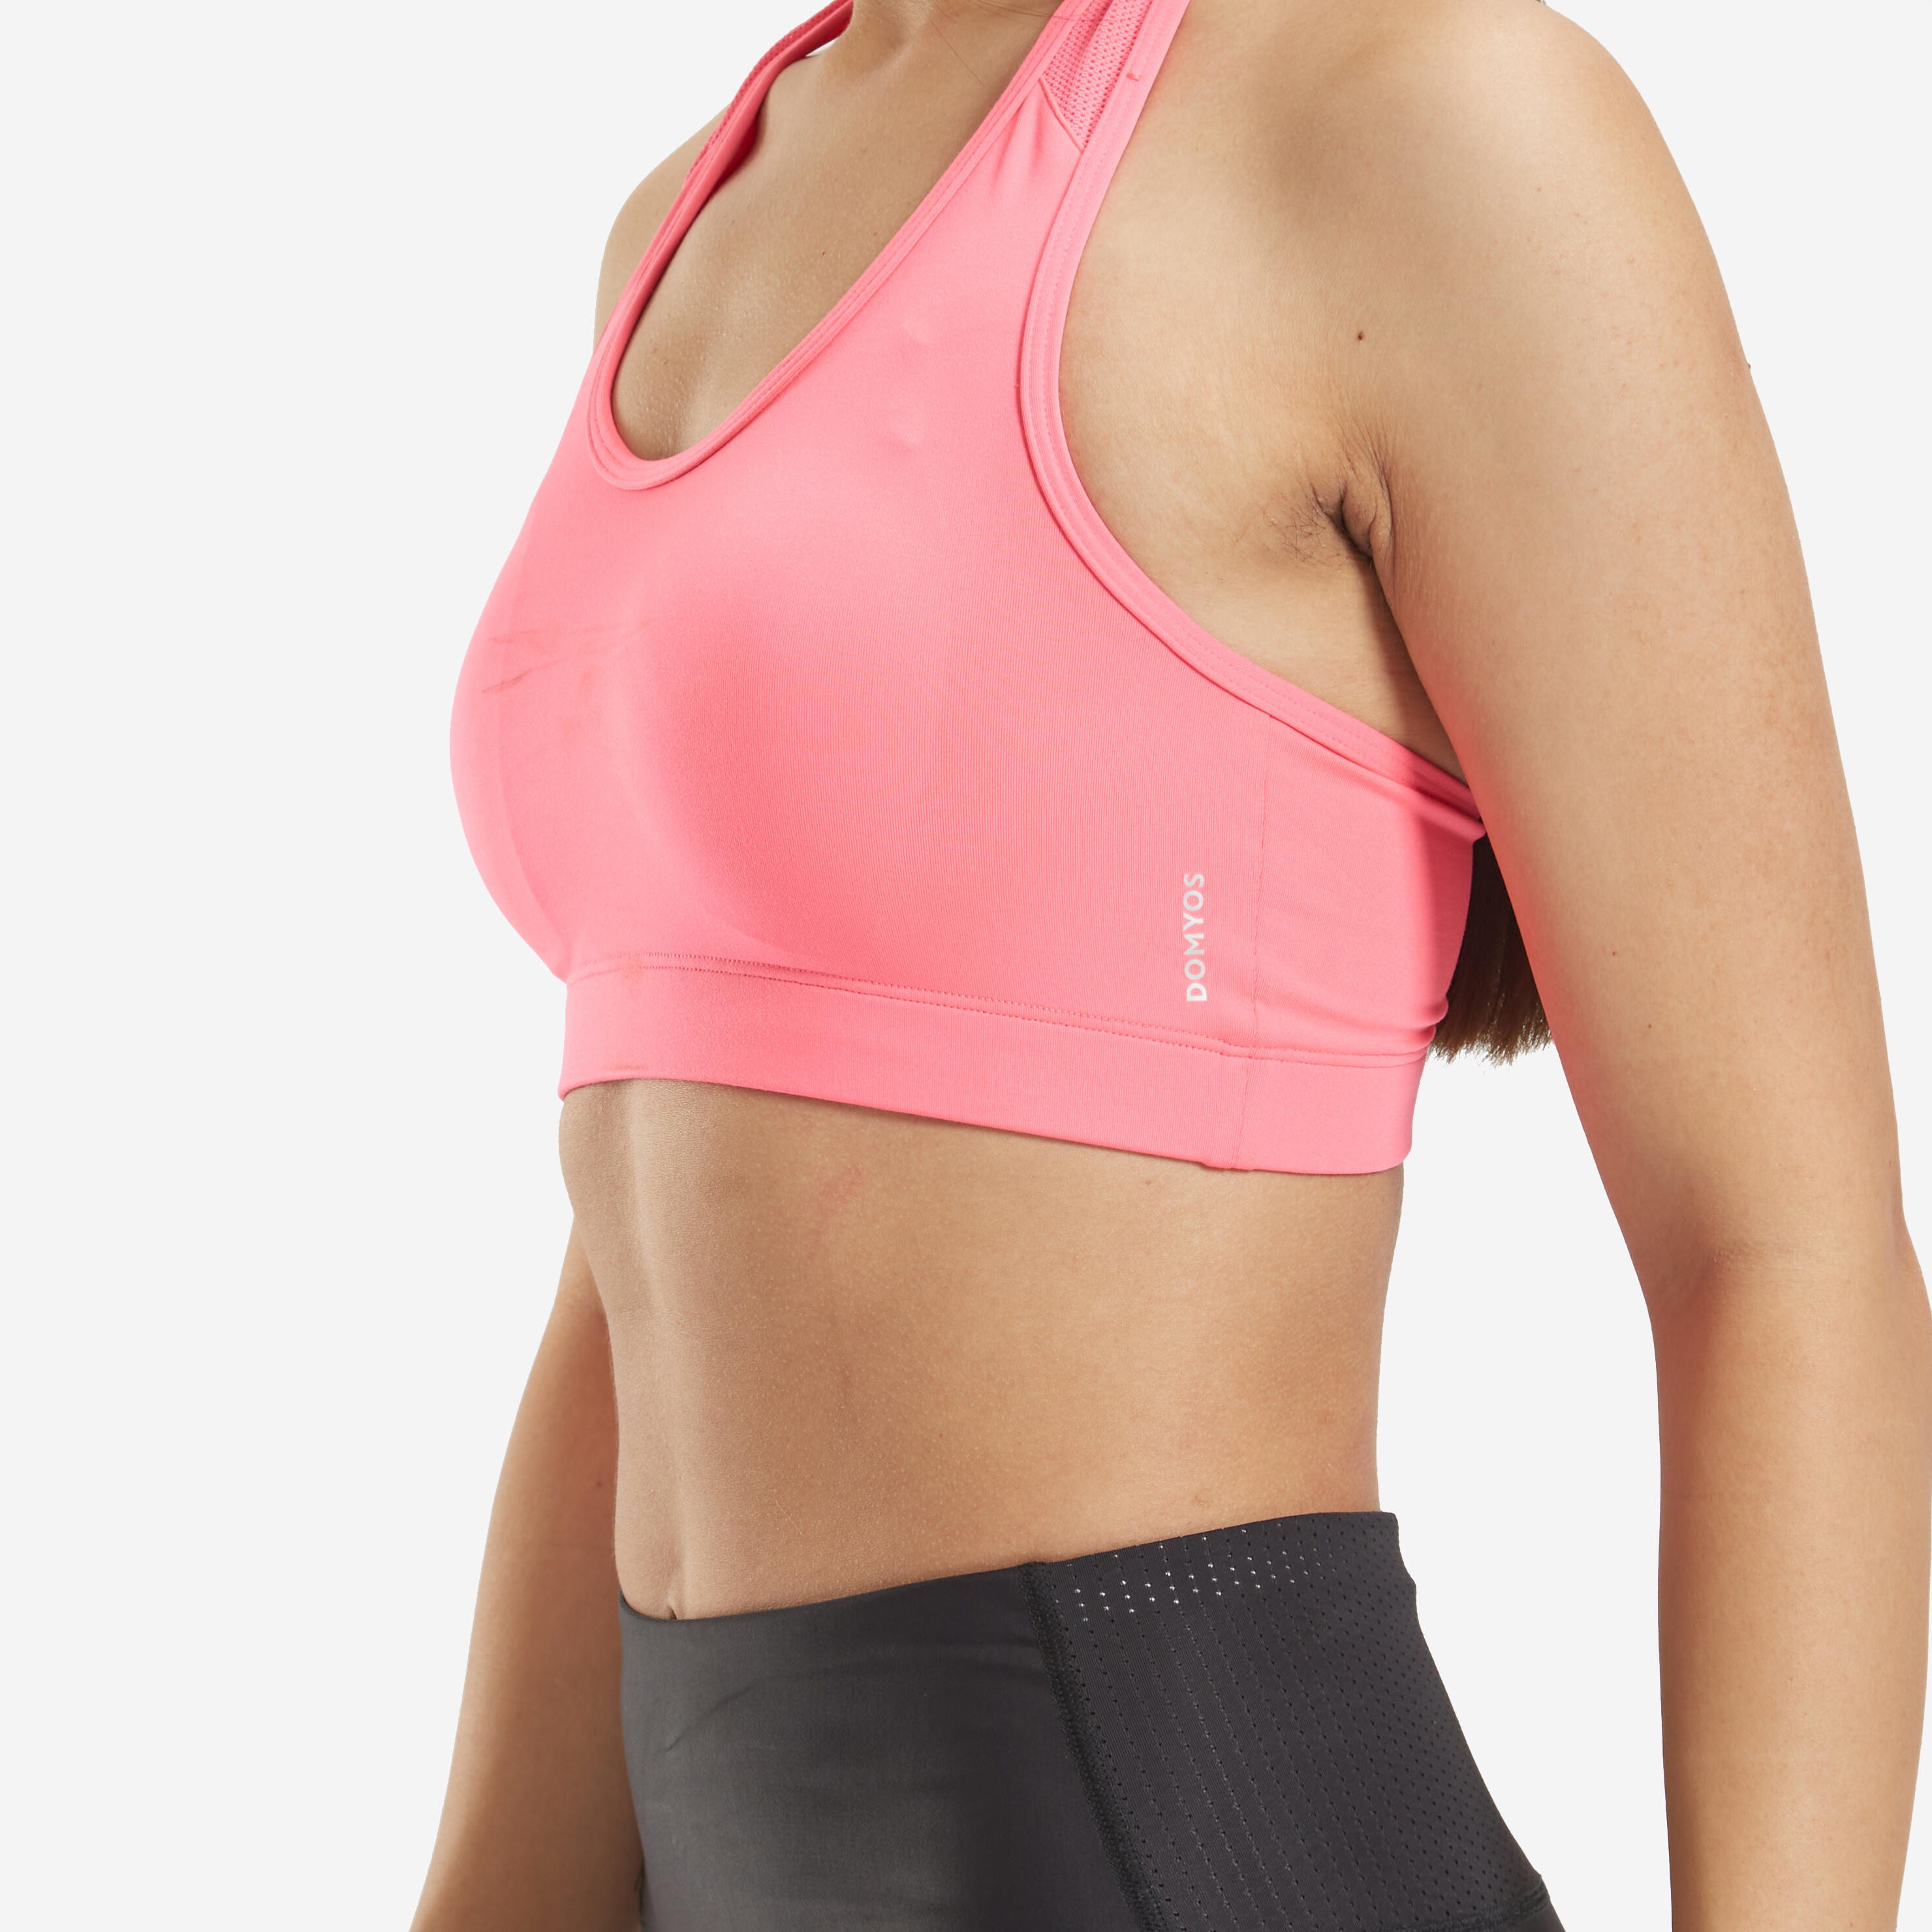 Domyos Womens Bra in Mumbai - Dealers, Manufacturers & Suppliers - Justdial